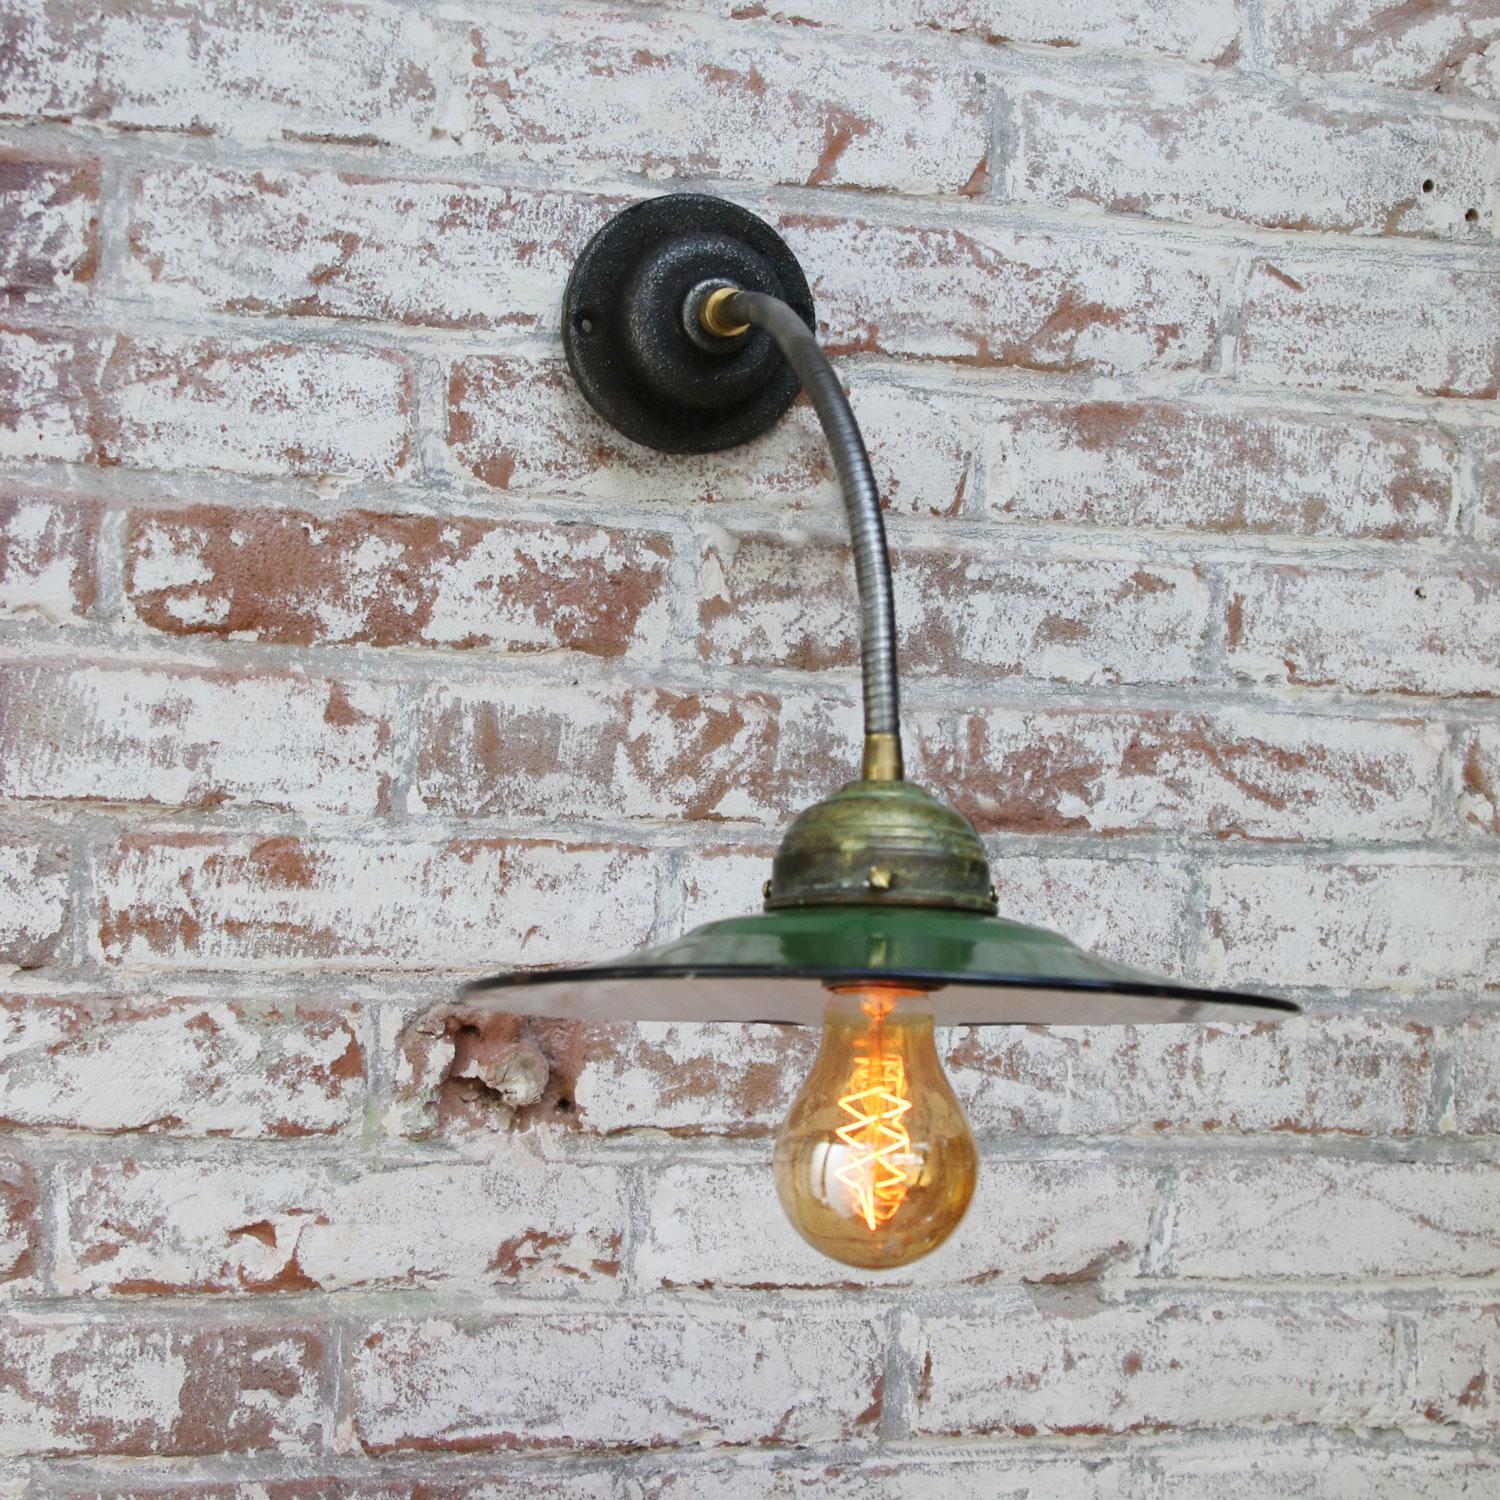 Wall light spot down lighter
Green enamel shade.
Gooseneck arm adjustable in angle.

Diameter cast iron wall mount 10.5 cm / 4”

Weight: 1.50 kg / 3.3 lb

Priced per individual item. All lamps have been made suitable by international standards for